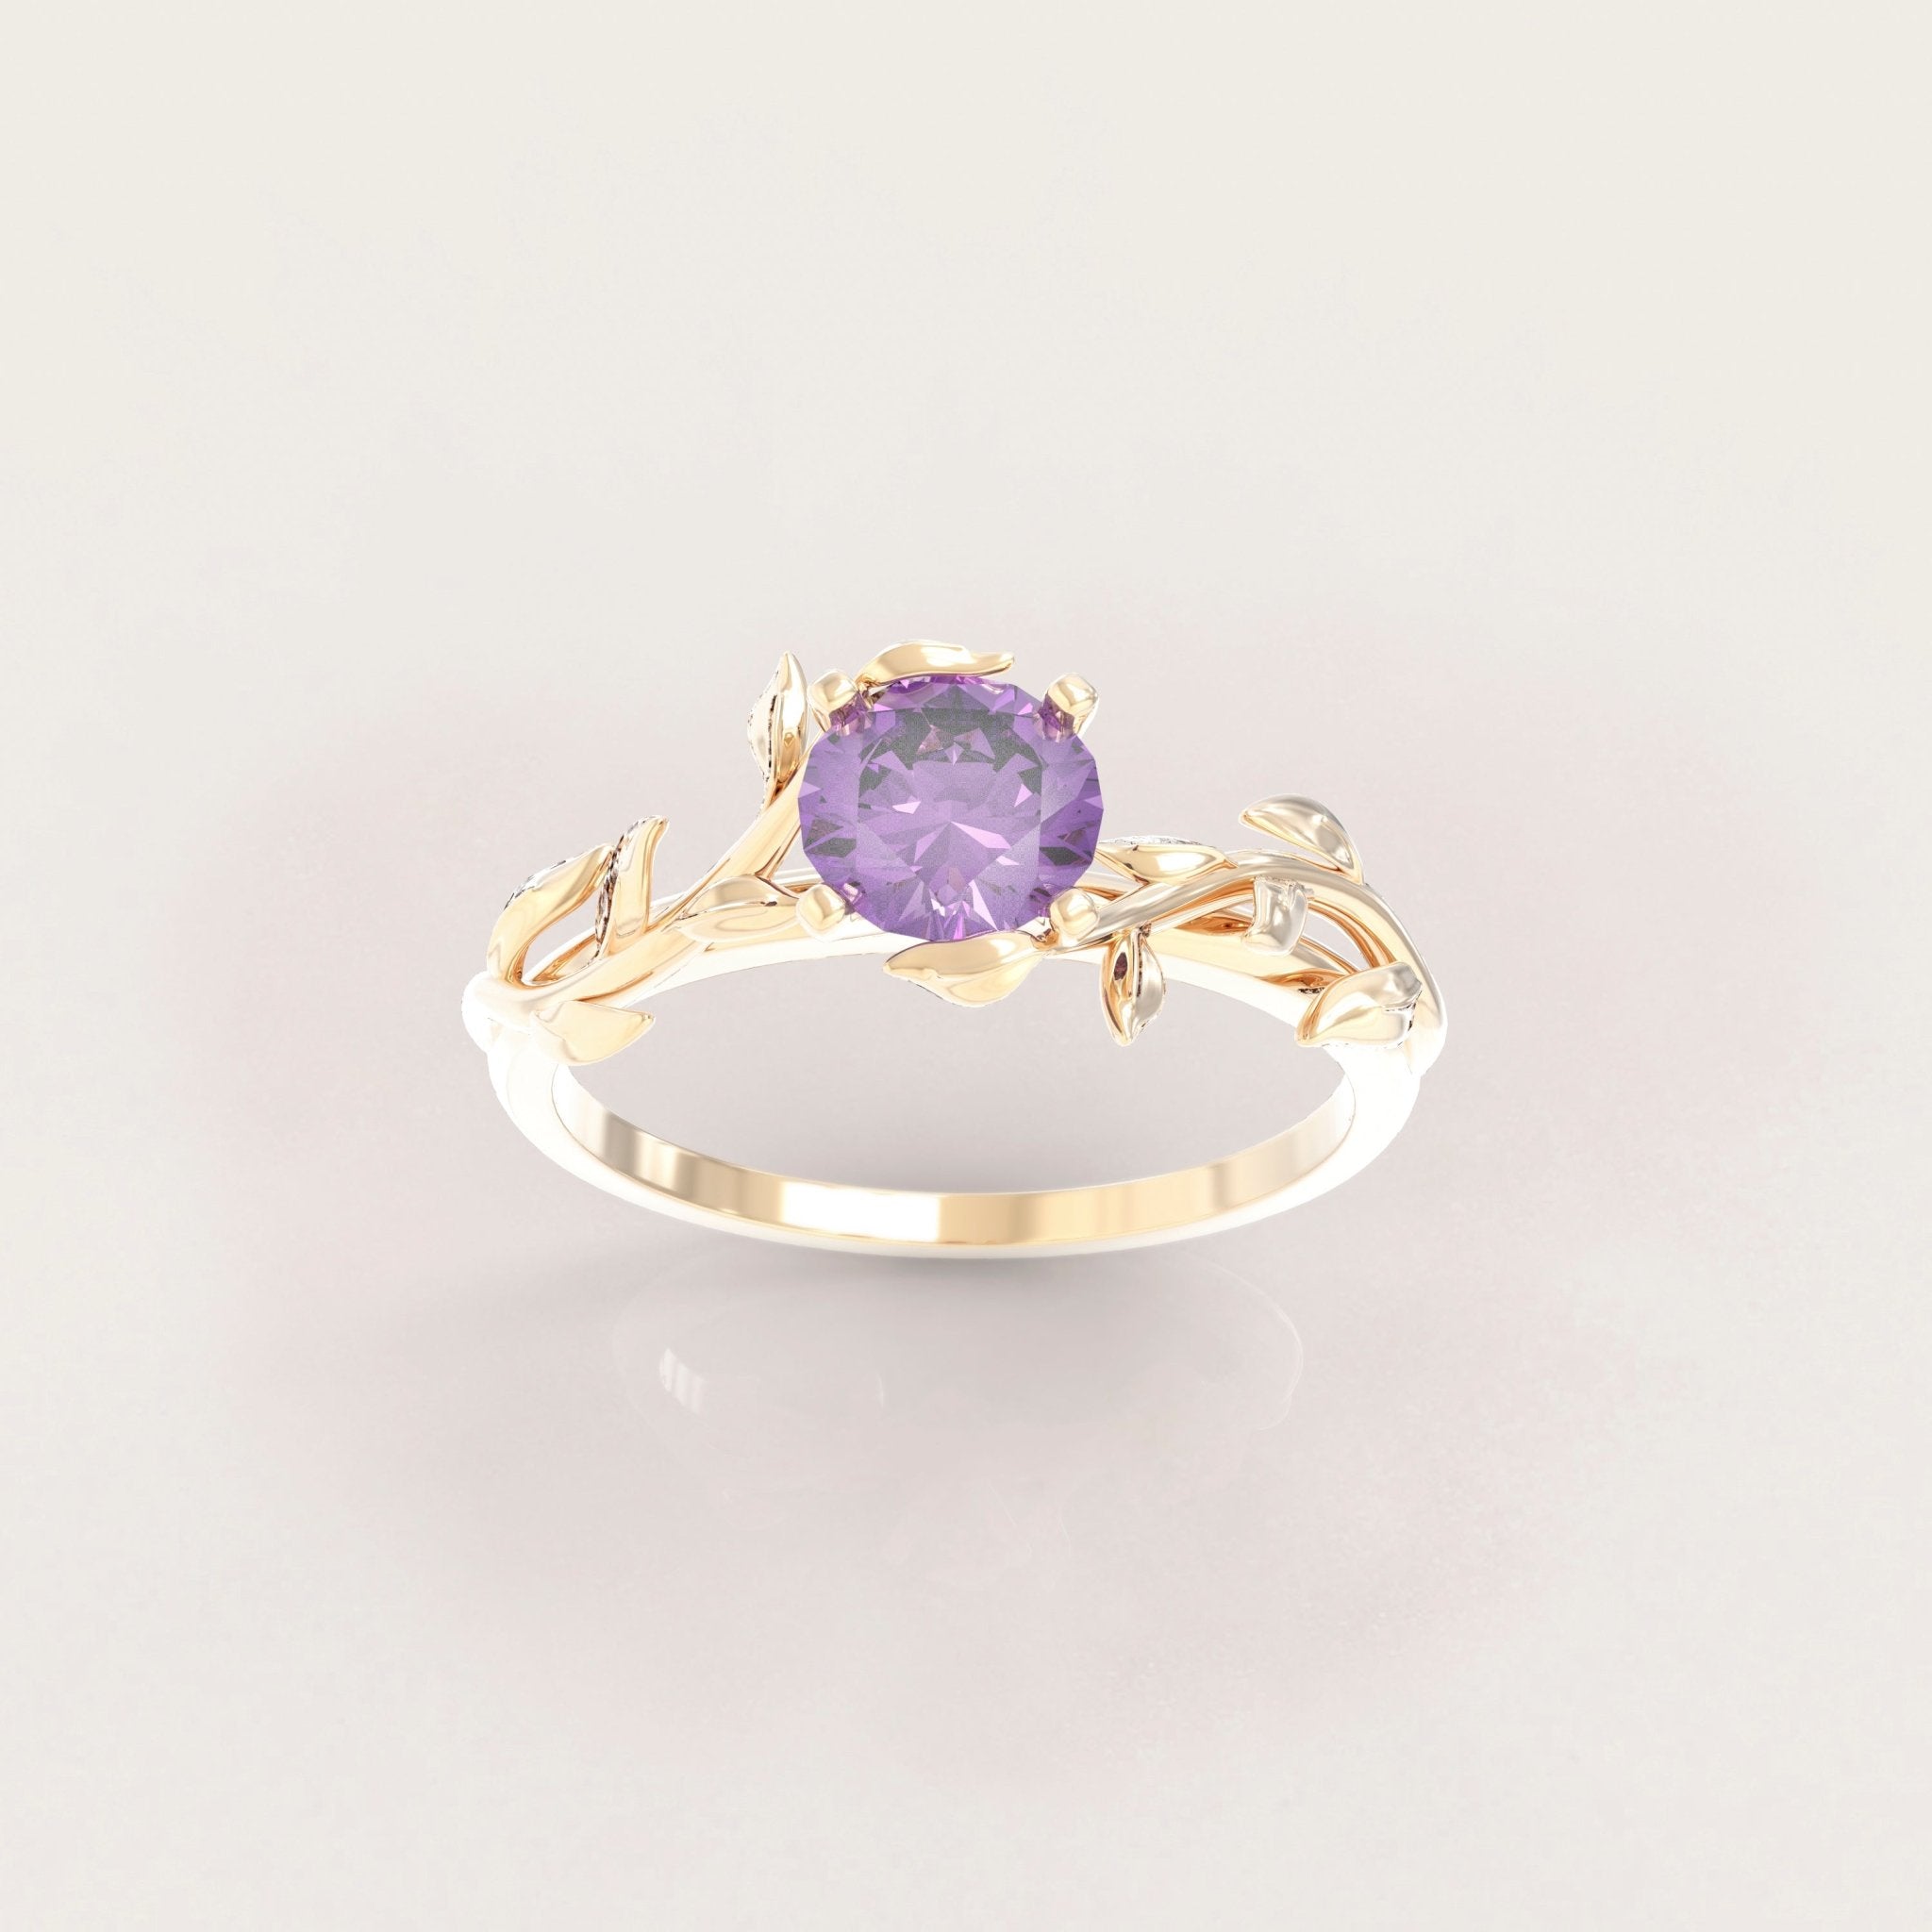 Unique Leaves Engagement Ring No.5 in Yellow Gold - Amethyst - Roelavi